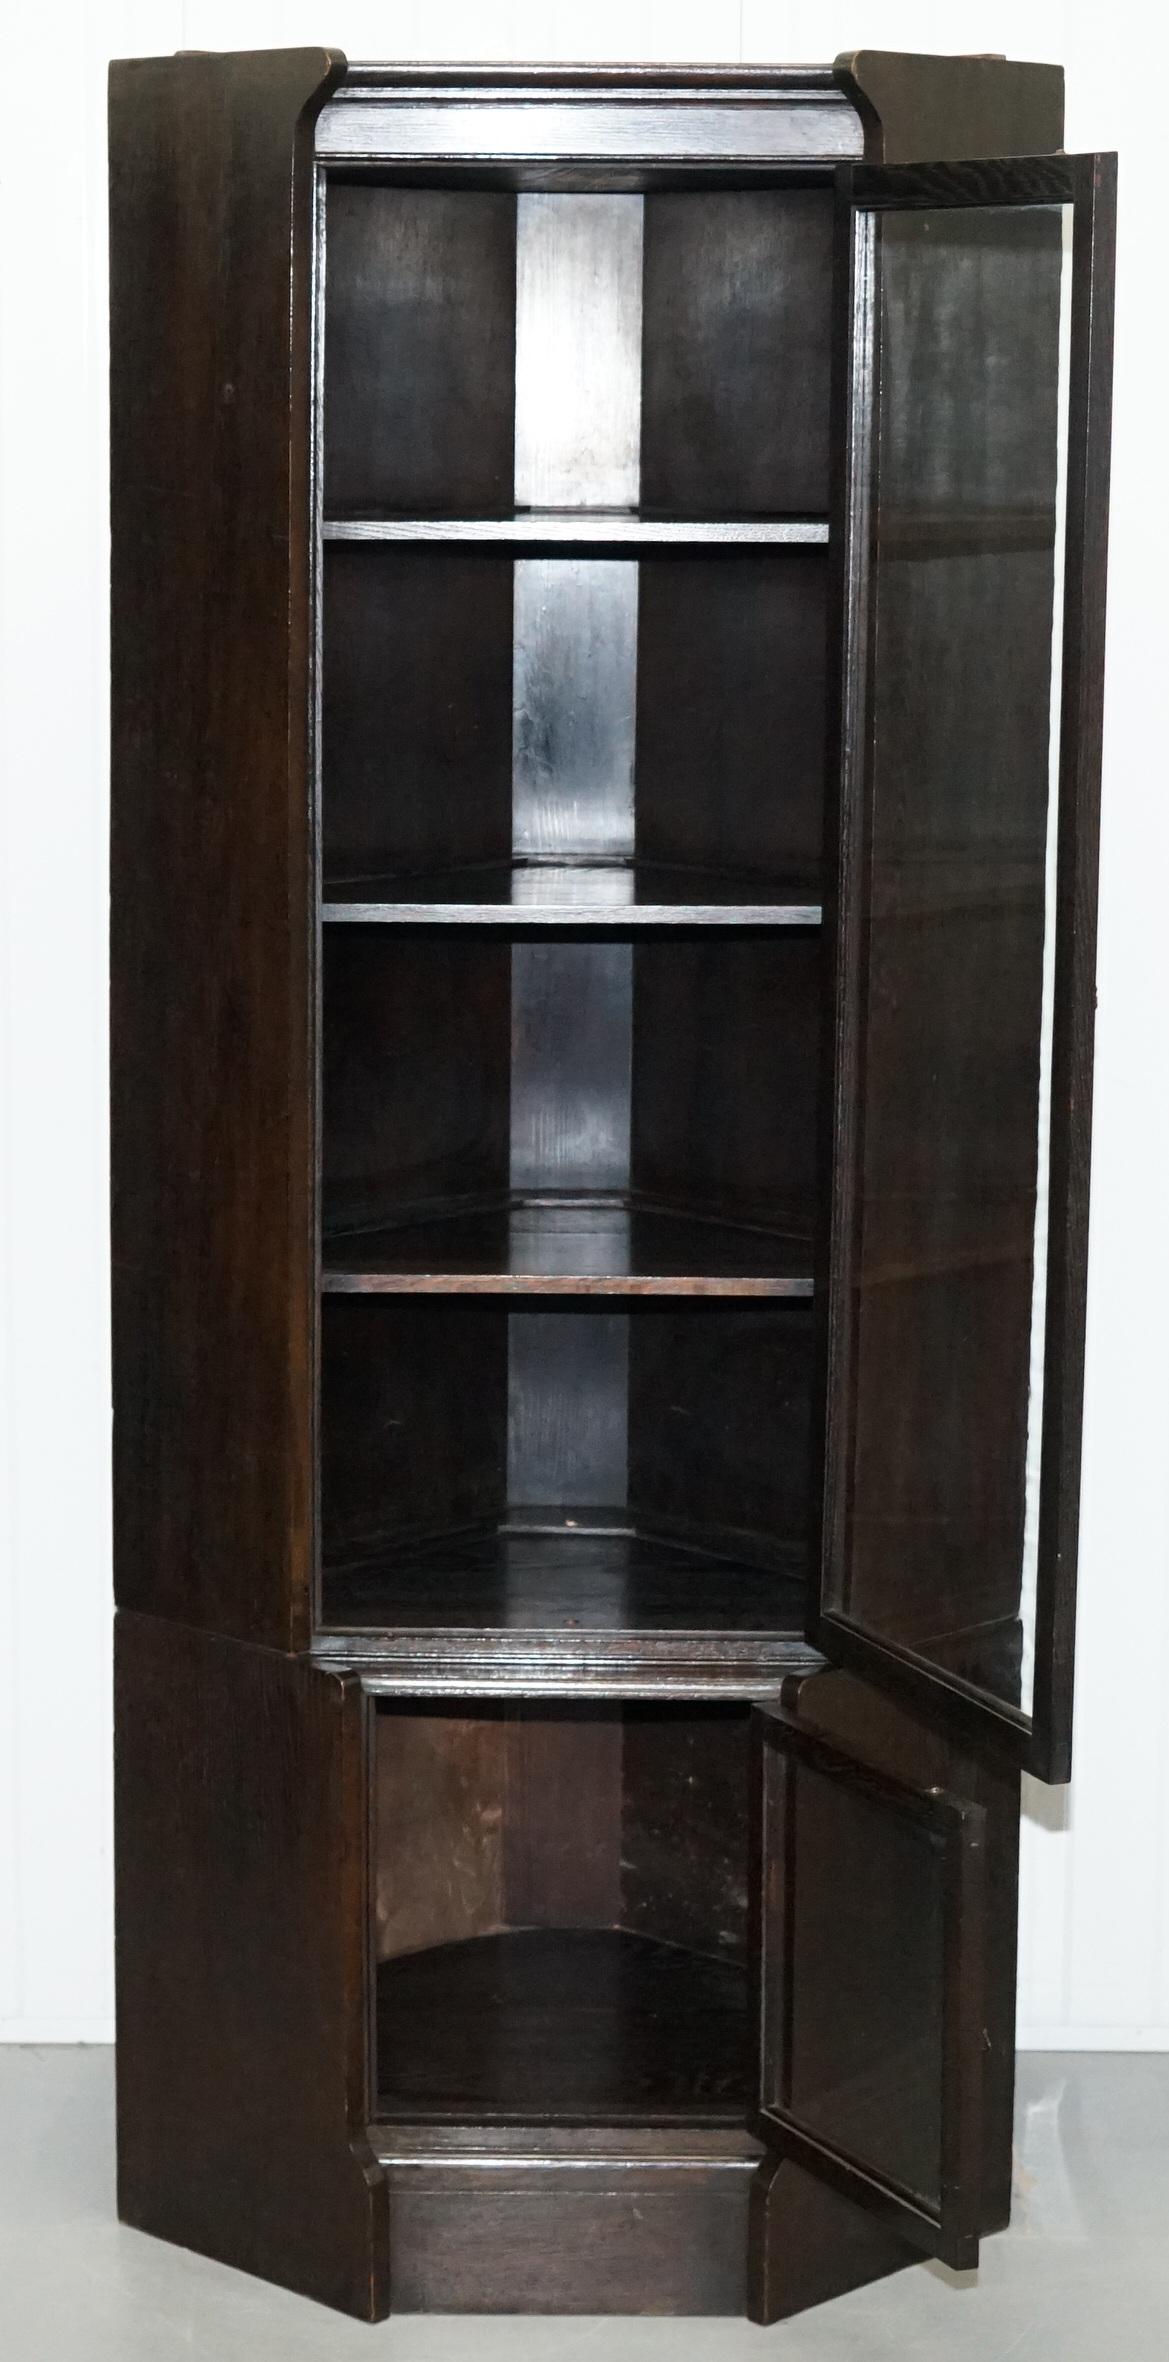 Rare William Baker Co Oxford Stacking Corner Legal Library Bookcase Minty Global 10